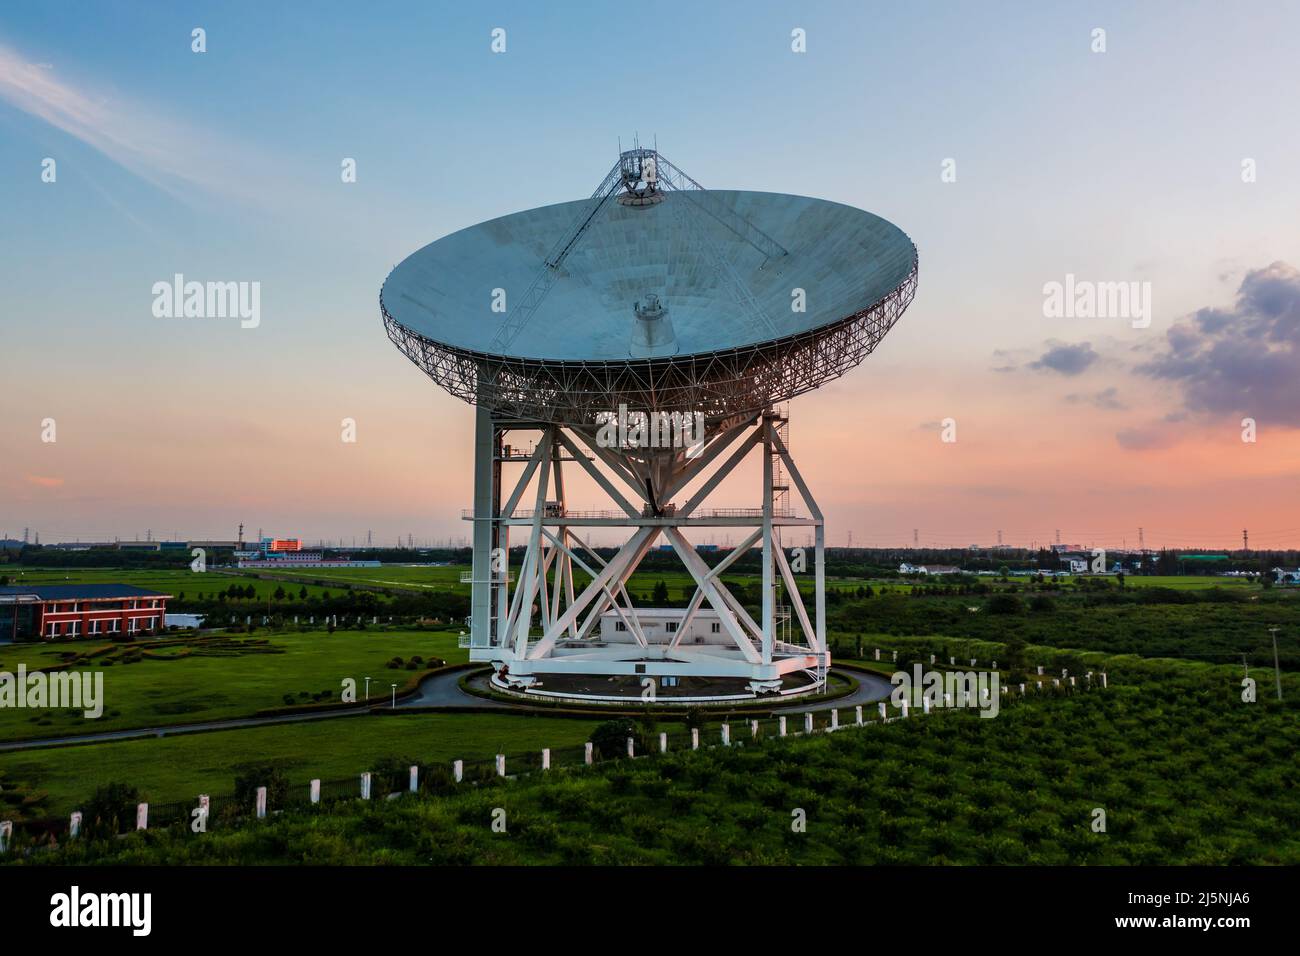 Aerial view of astronomical radio telescope at sunset Stock Photo